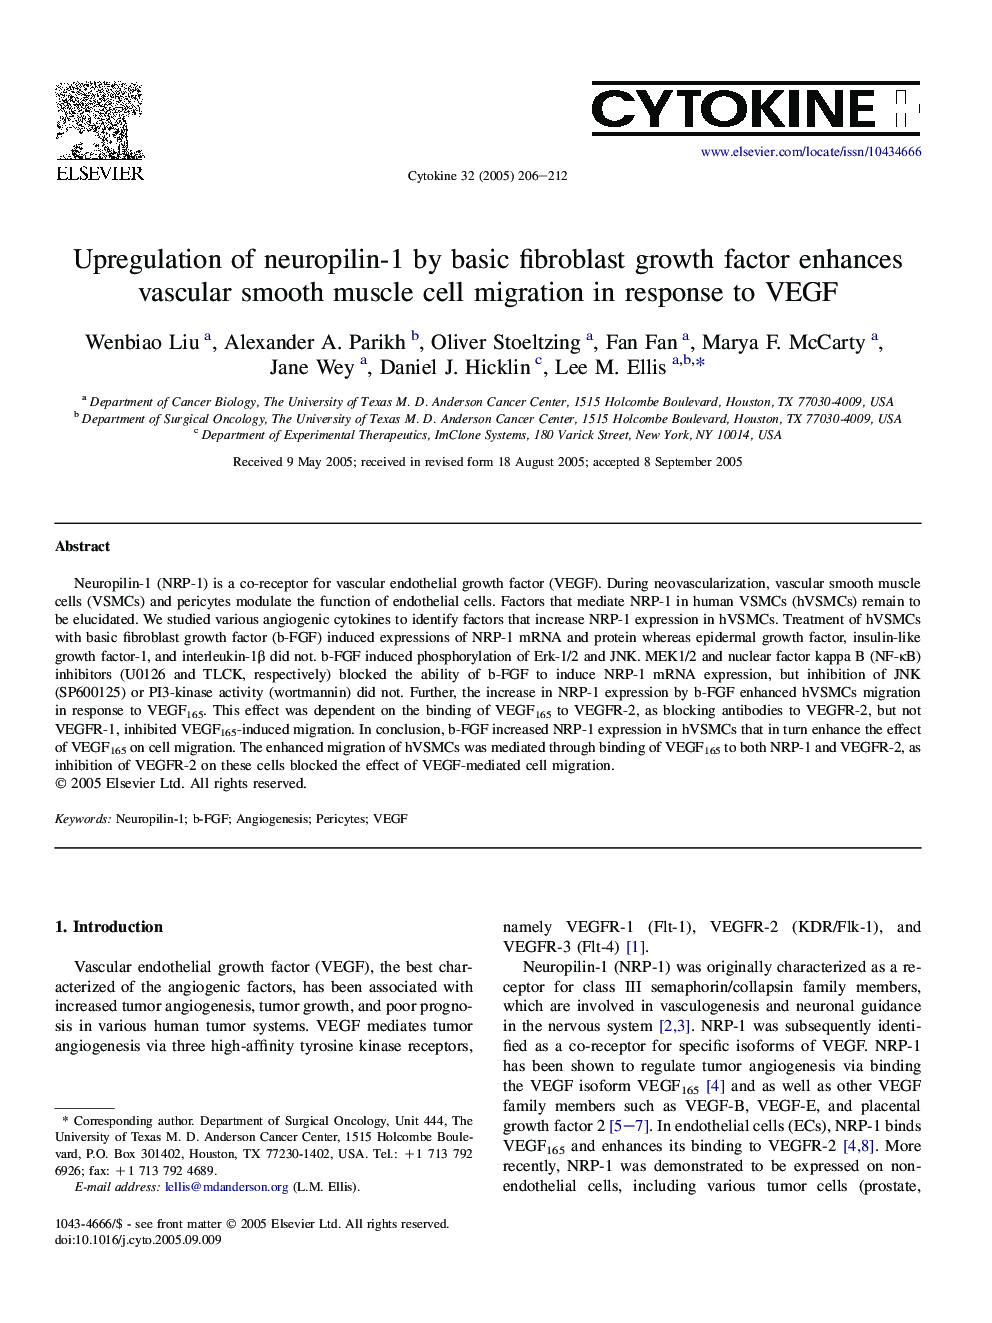 Upregulation of neuropilin-1 by basic fibroblast growth factor enhances vascular smooth muscle cell migration in response to VEGF